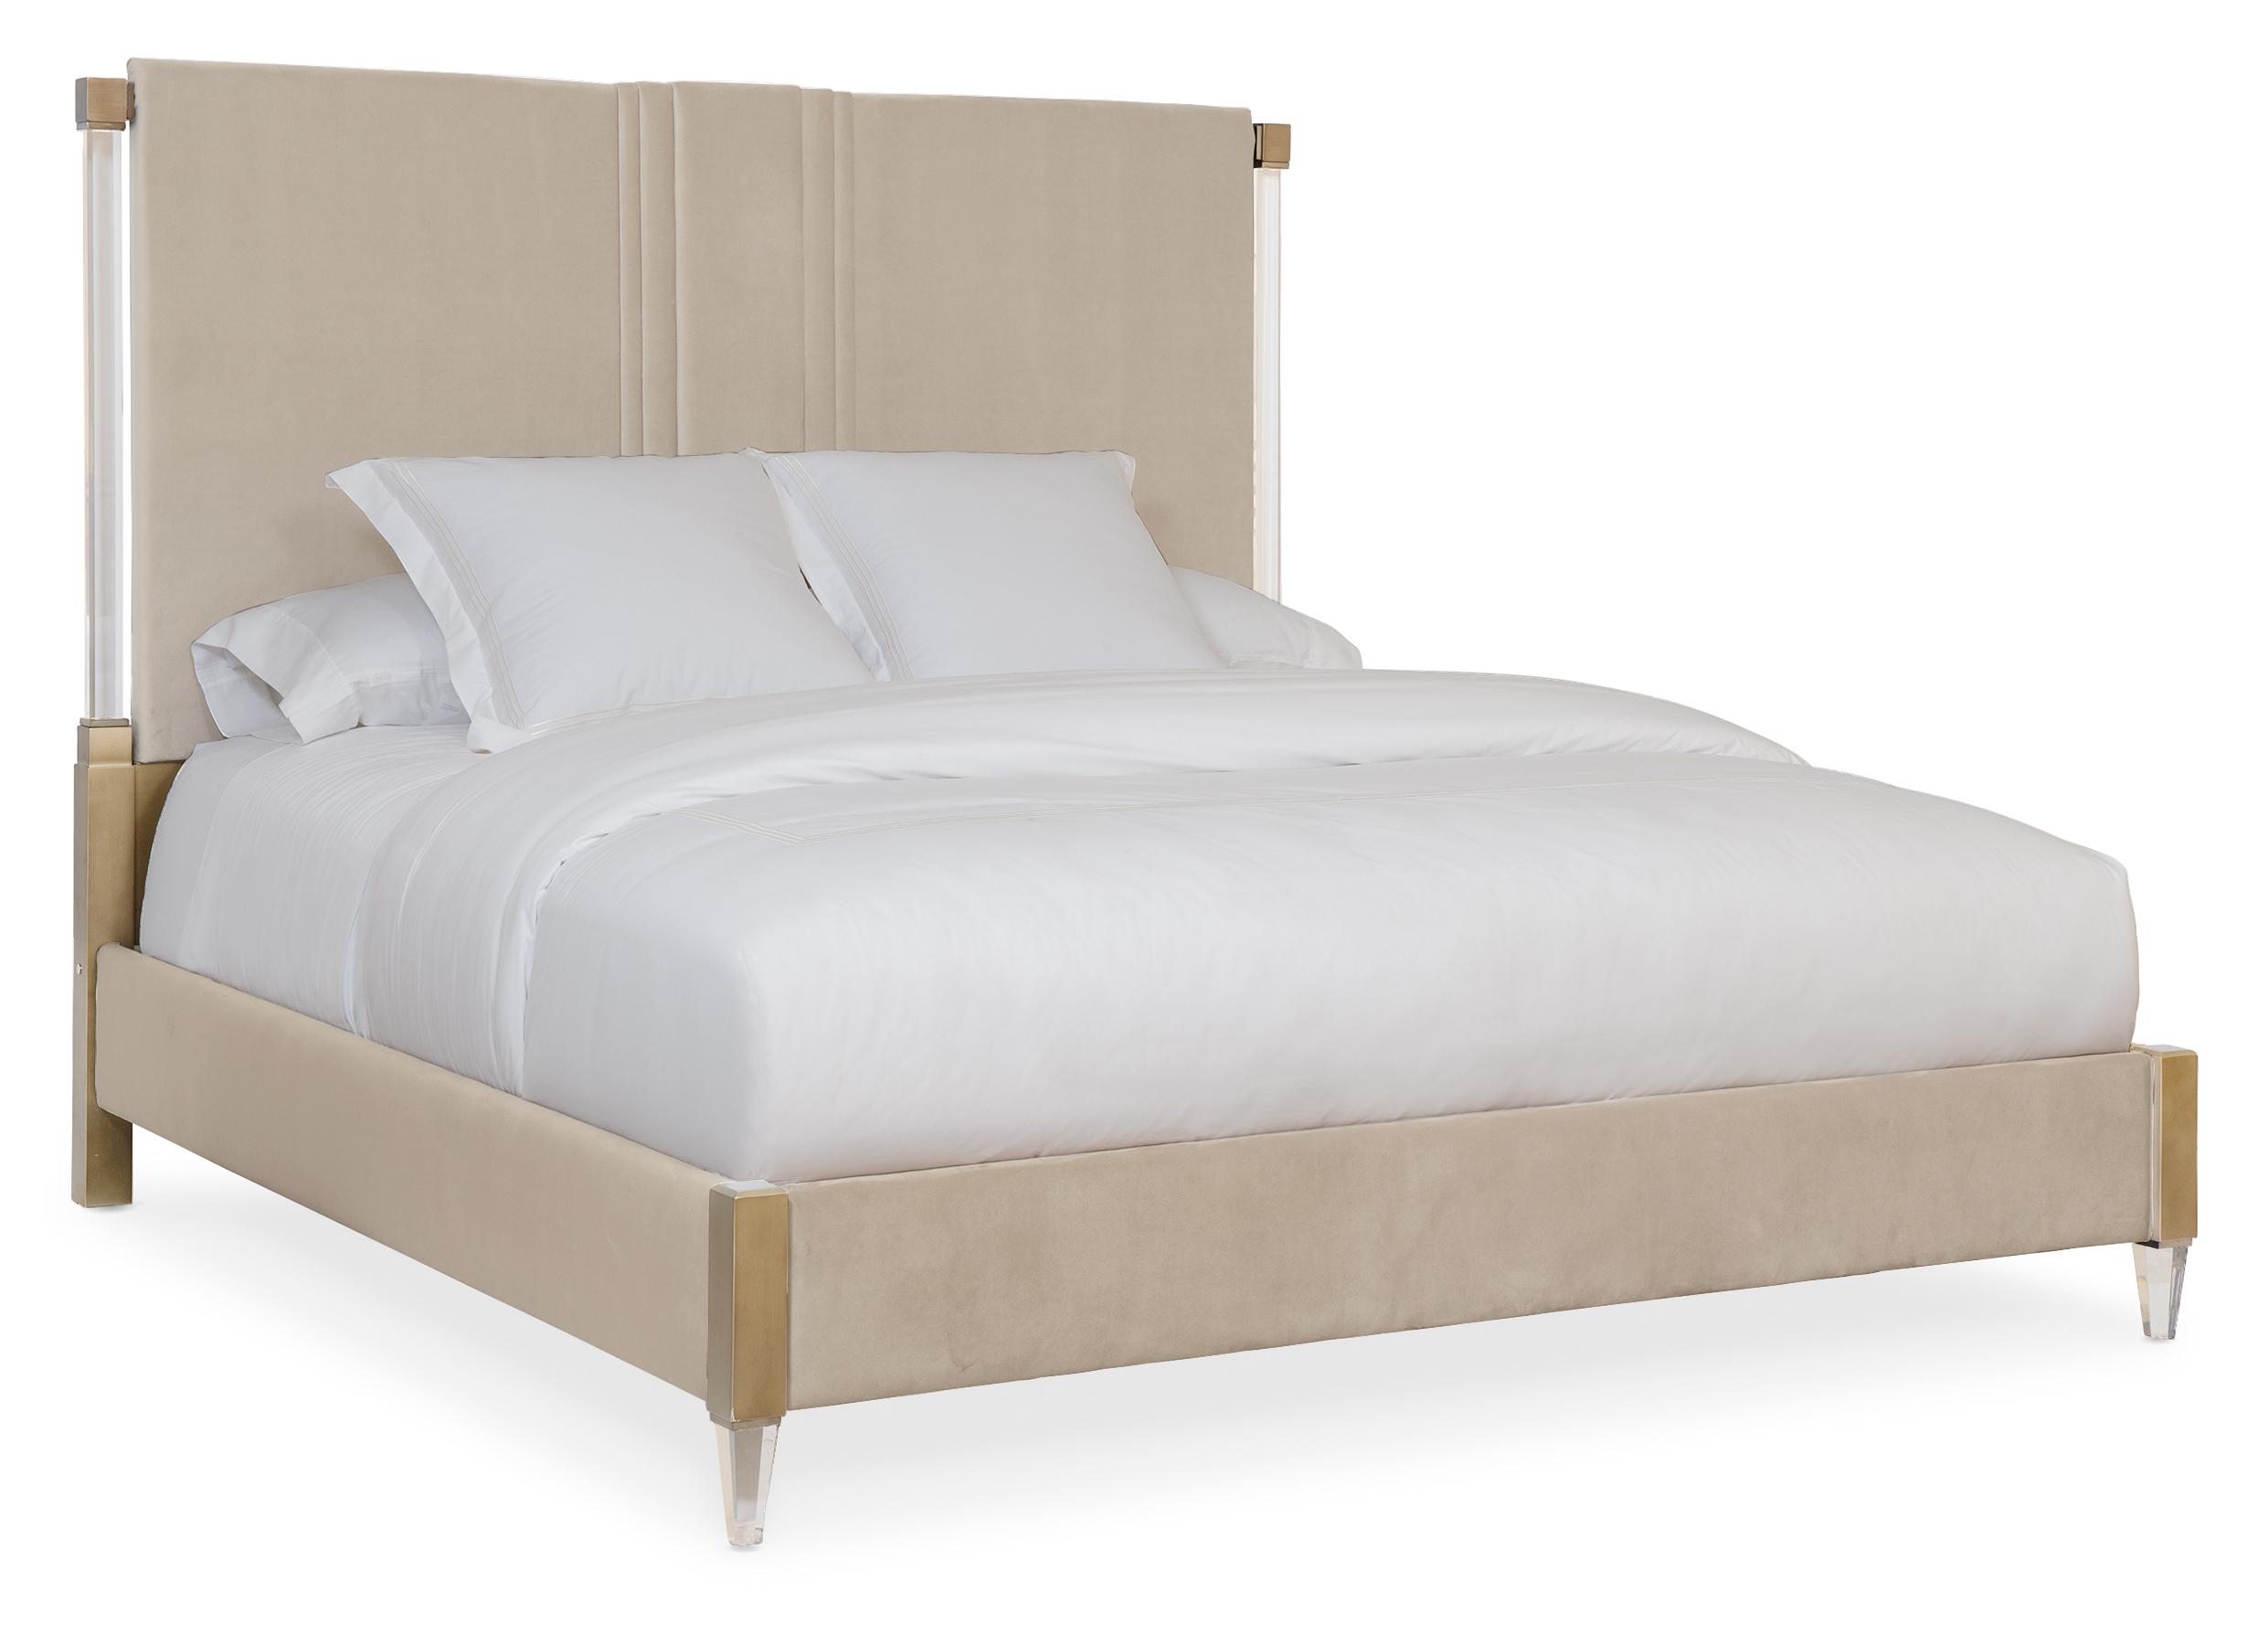 Contemporary Platform Bed Light Up Your Life CLA-019-102 in Beige Microfiber